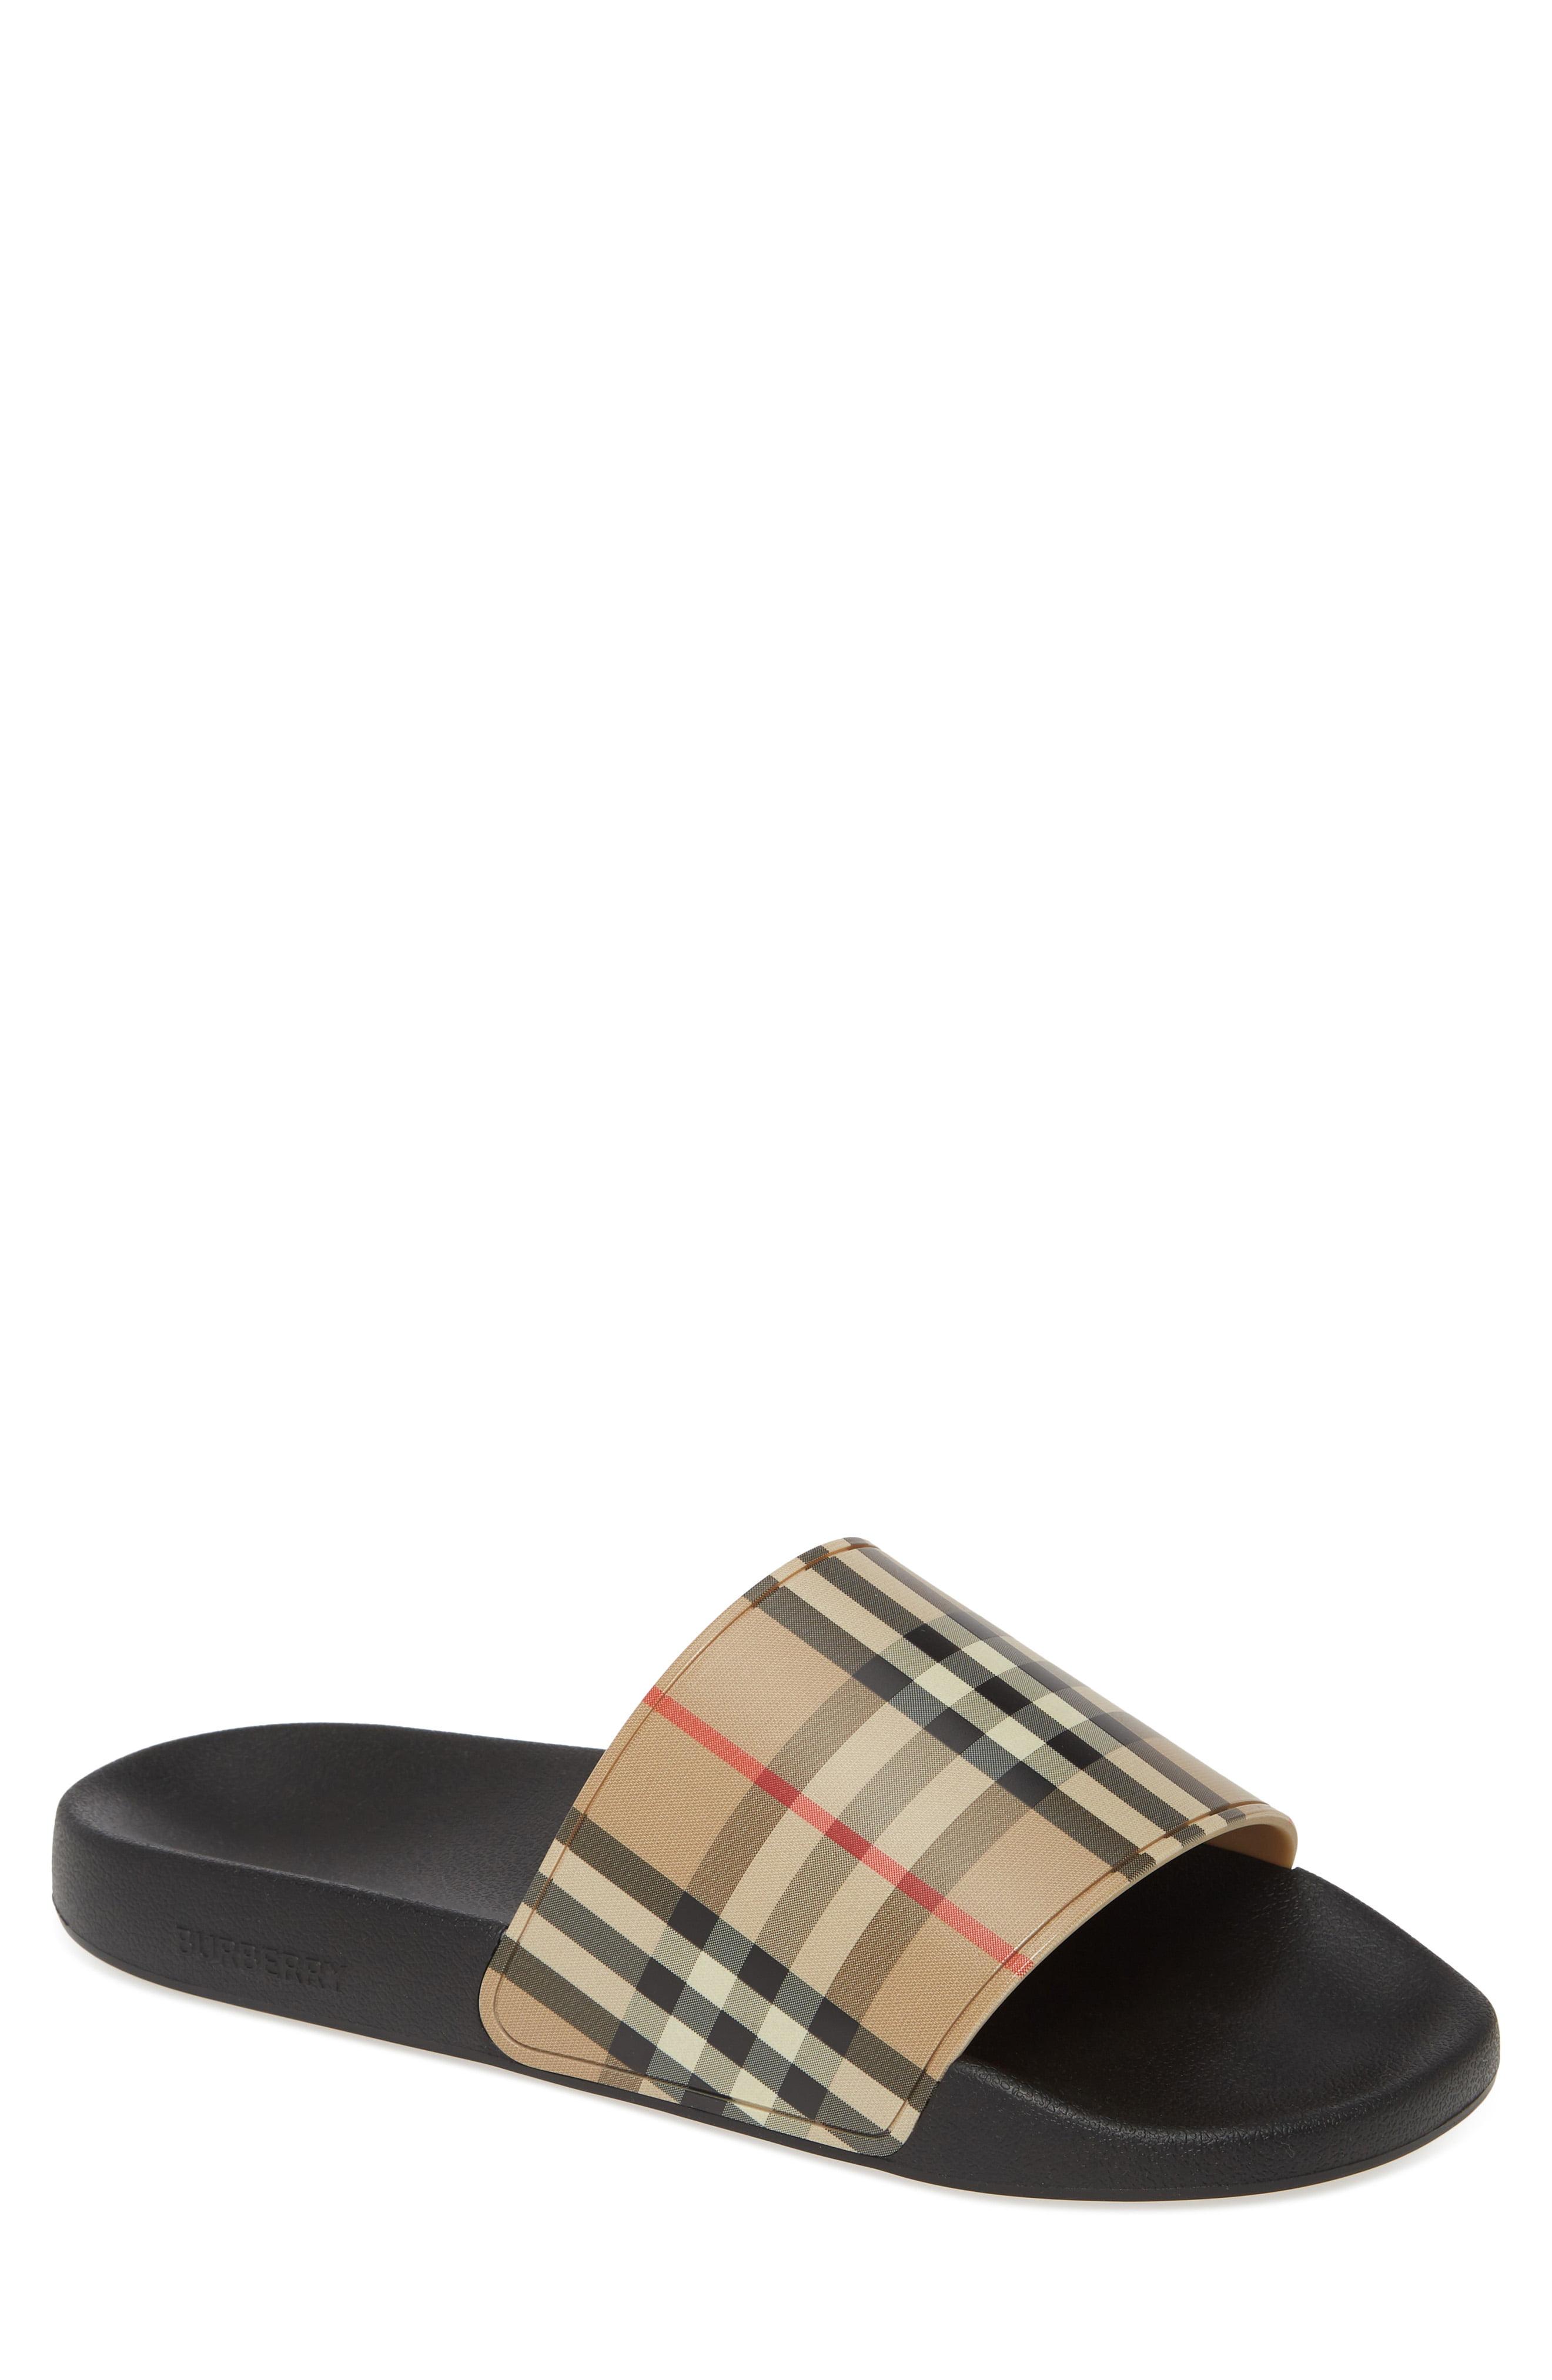 Burberry Rubber Check Slides for Men - Save 40% - Lyst